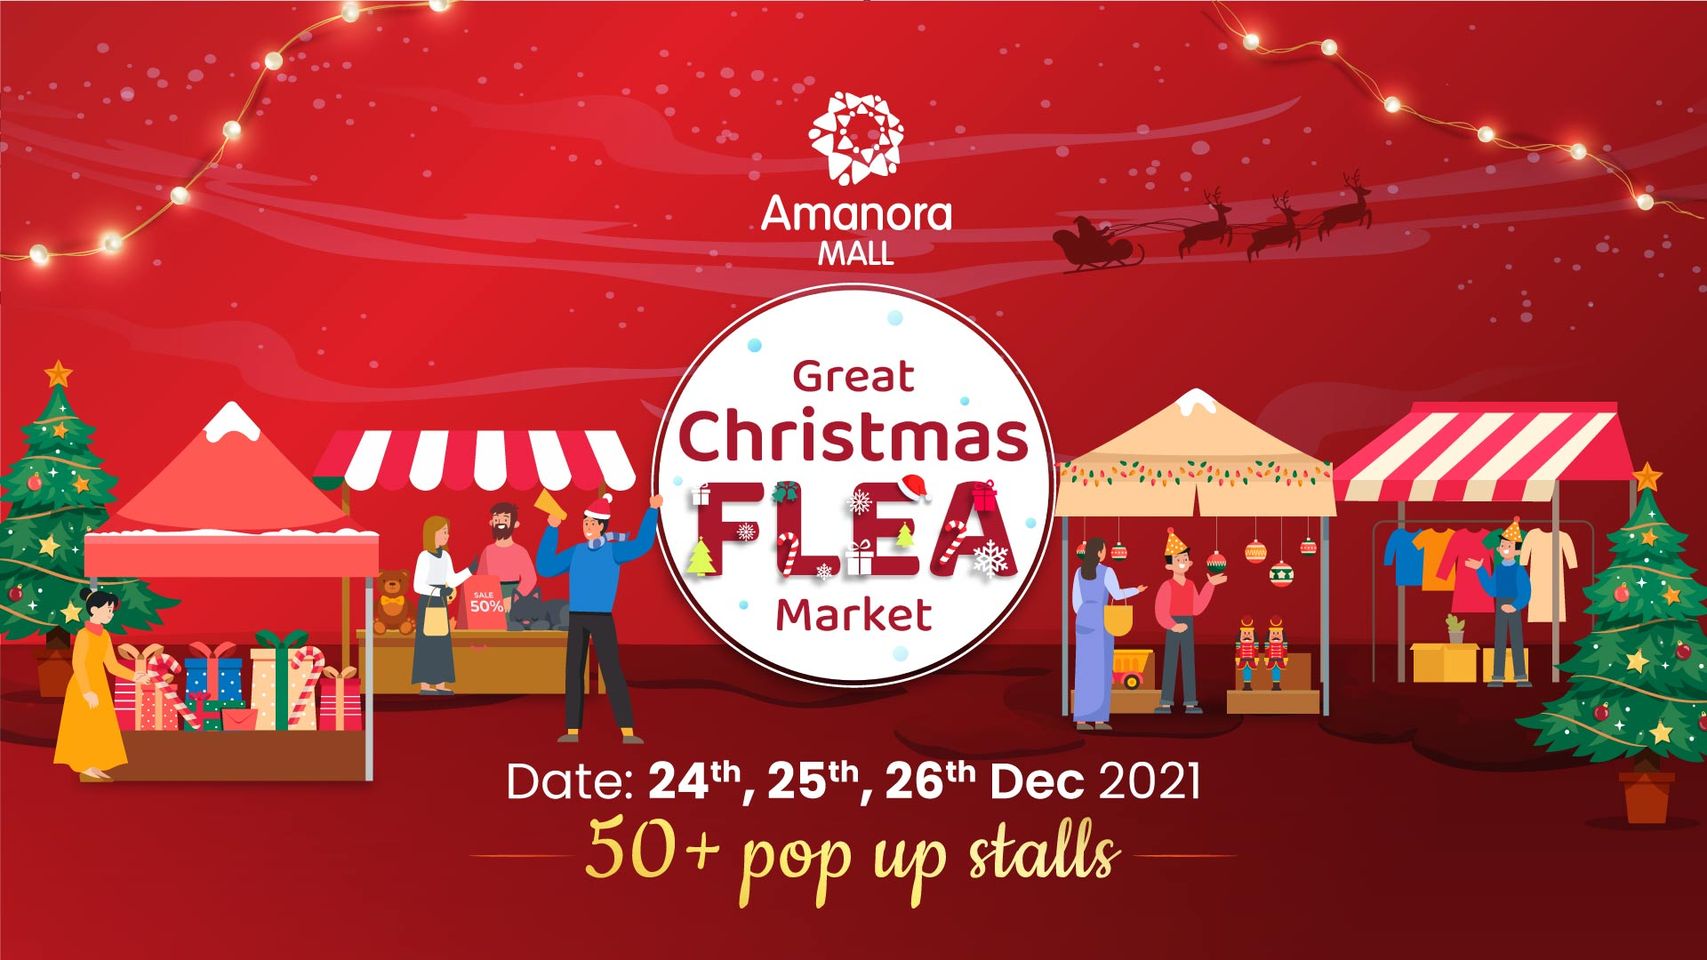 Cherish the joy of togetherness at the Great Christmas Flea Market